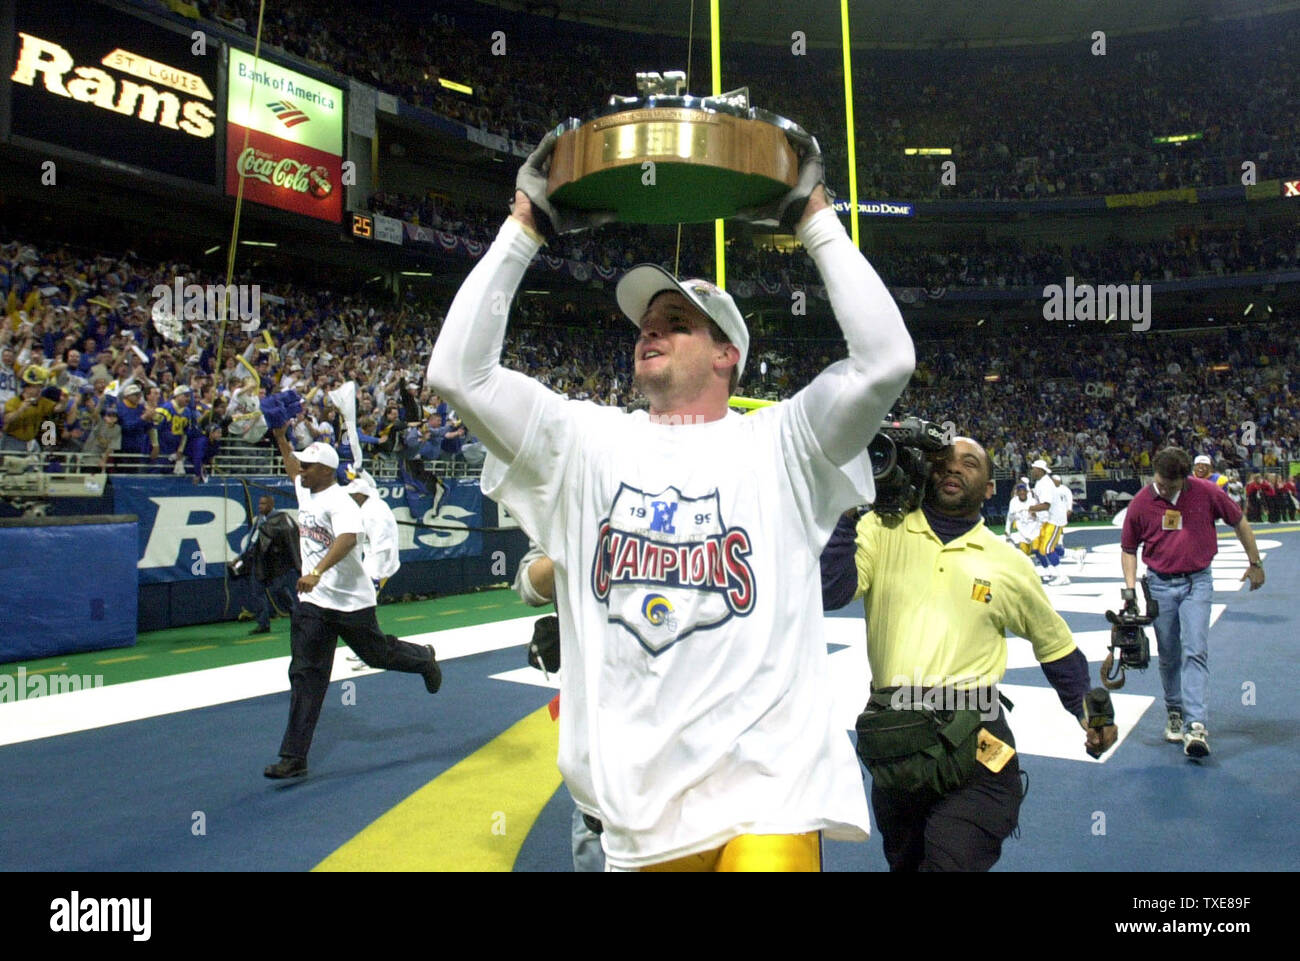 SLP2000012318 - 23 JANUARY 200 - ST. LOUIS, MISSOURI, USA: St. Louis Rams  wide receiver Ricky Proehl runs around the Trans World Dome with the Vince  Lombardi Trophy after defeating the Tampa